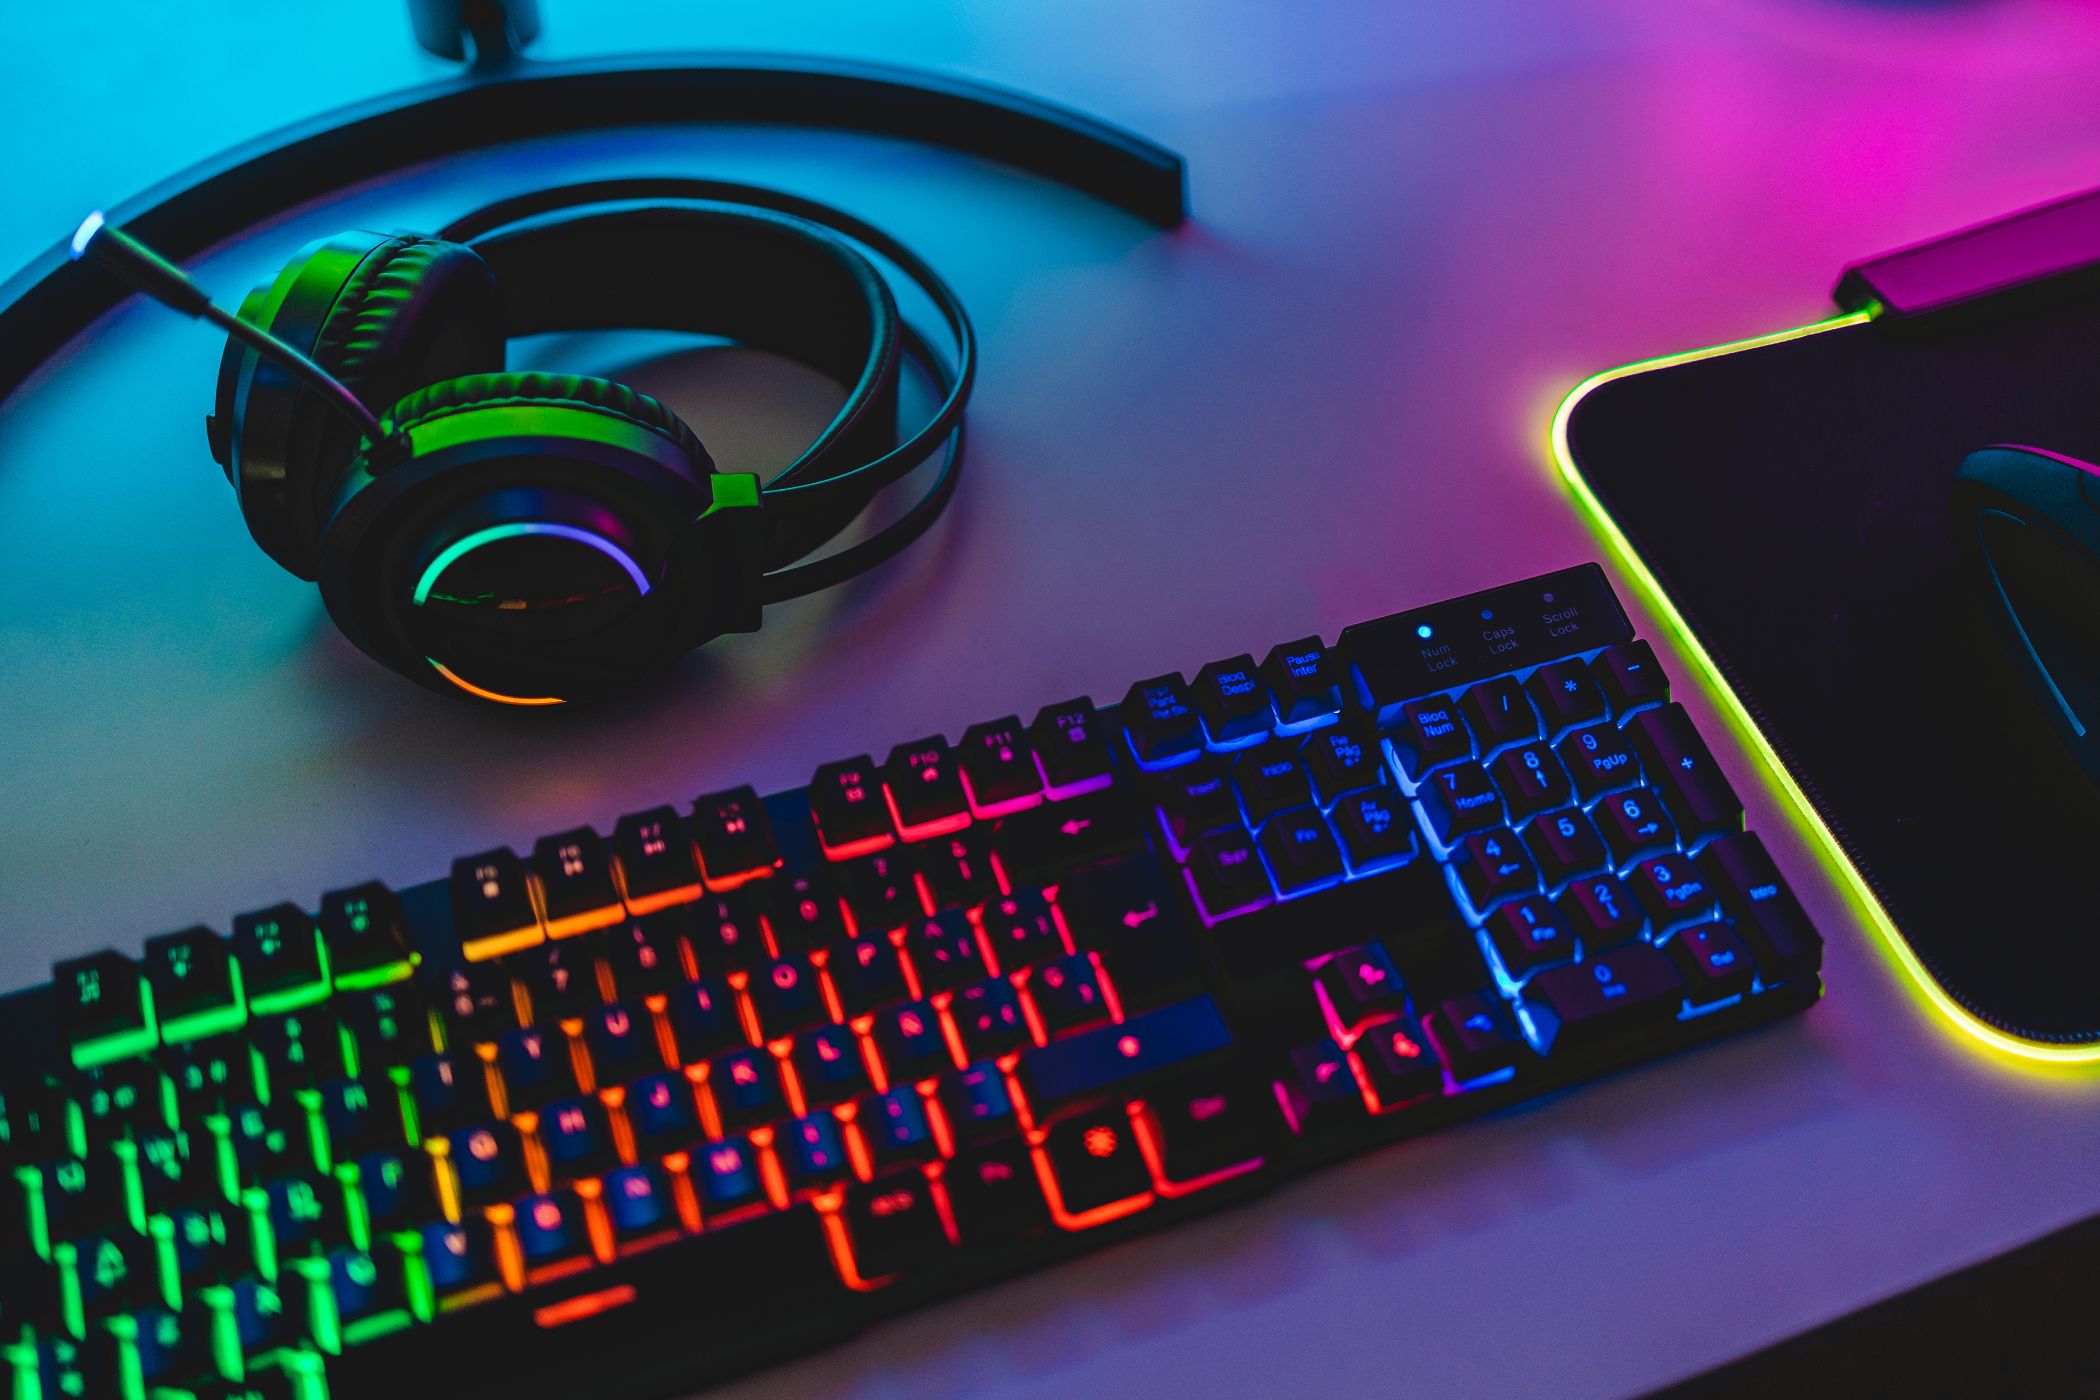 RGB keyboard, headset, and mouse-pad.